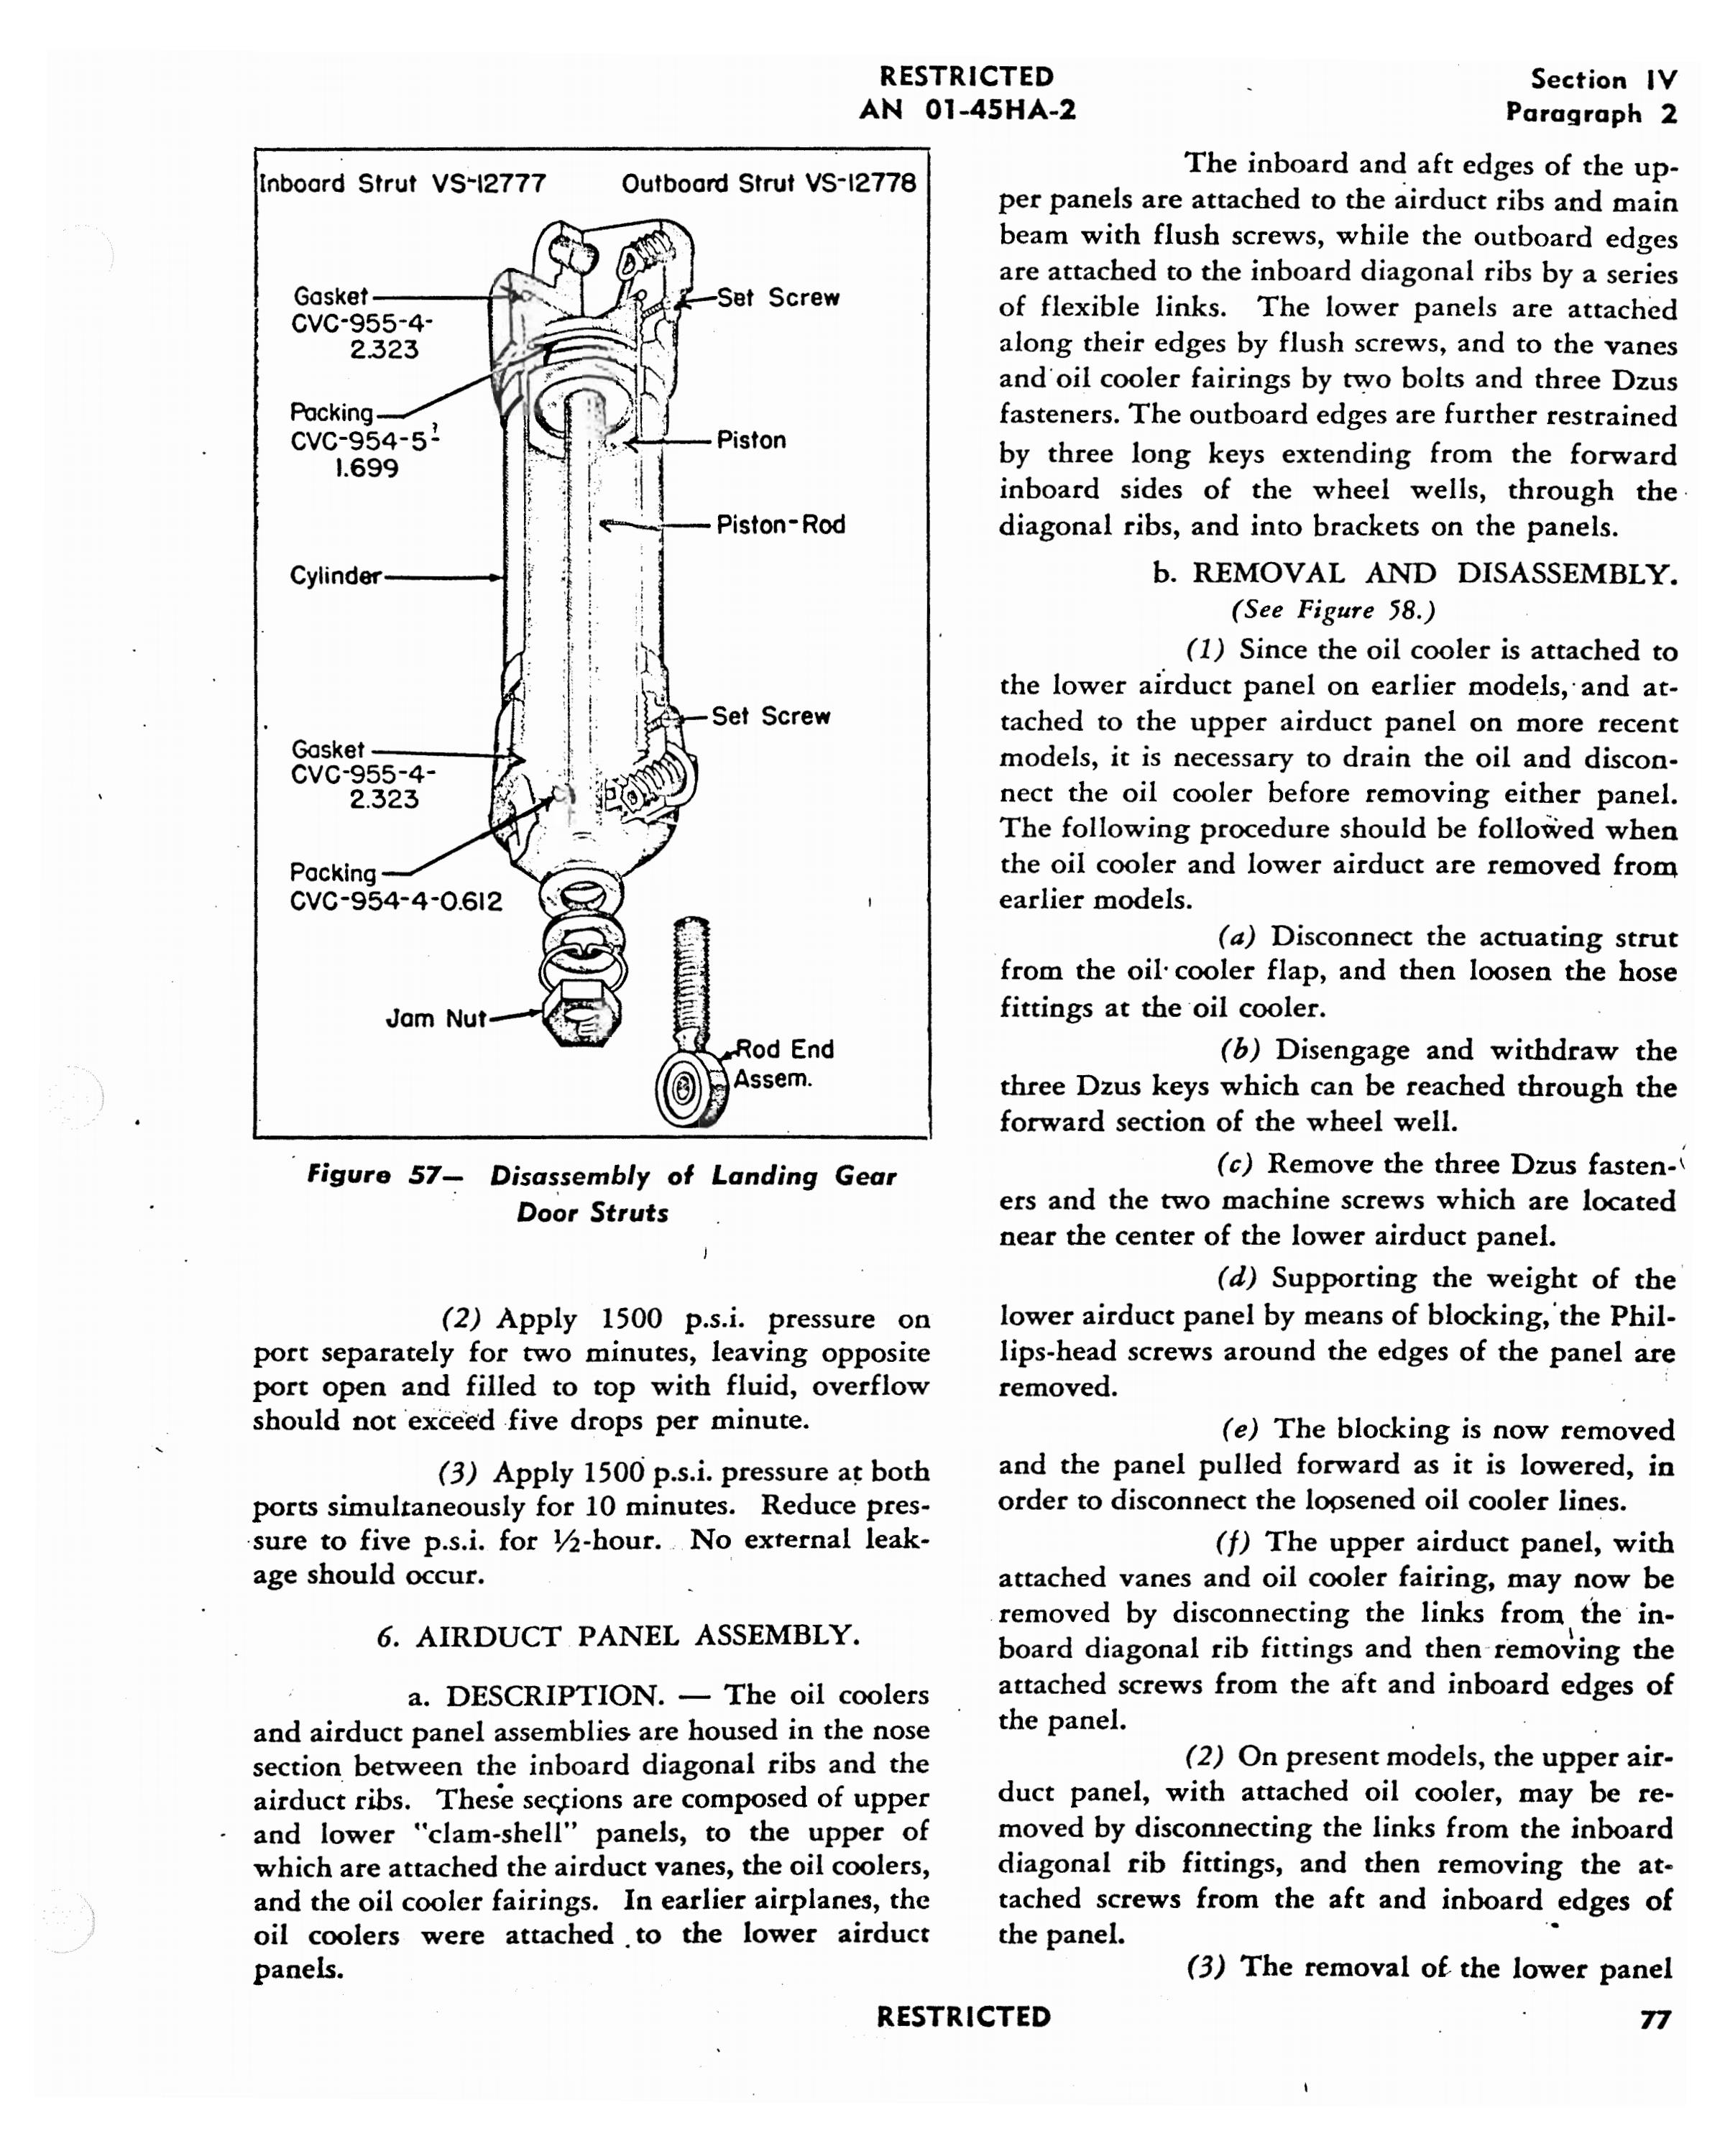 Sample page 91 from AirCorps Library document: Erection & Maintenance Handbook - Corsair